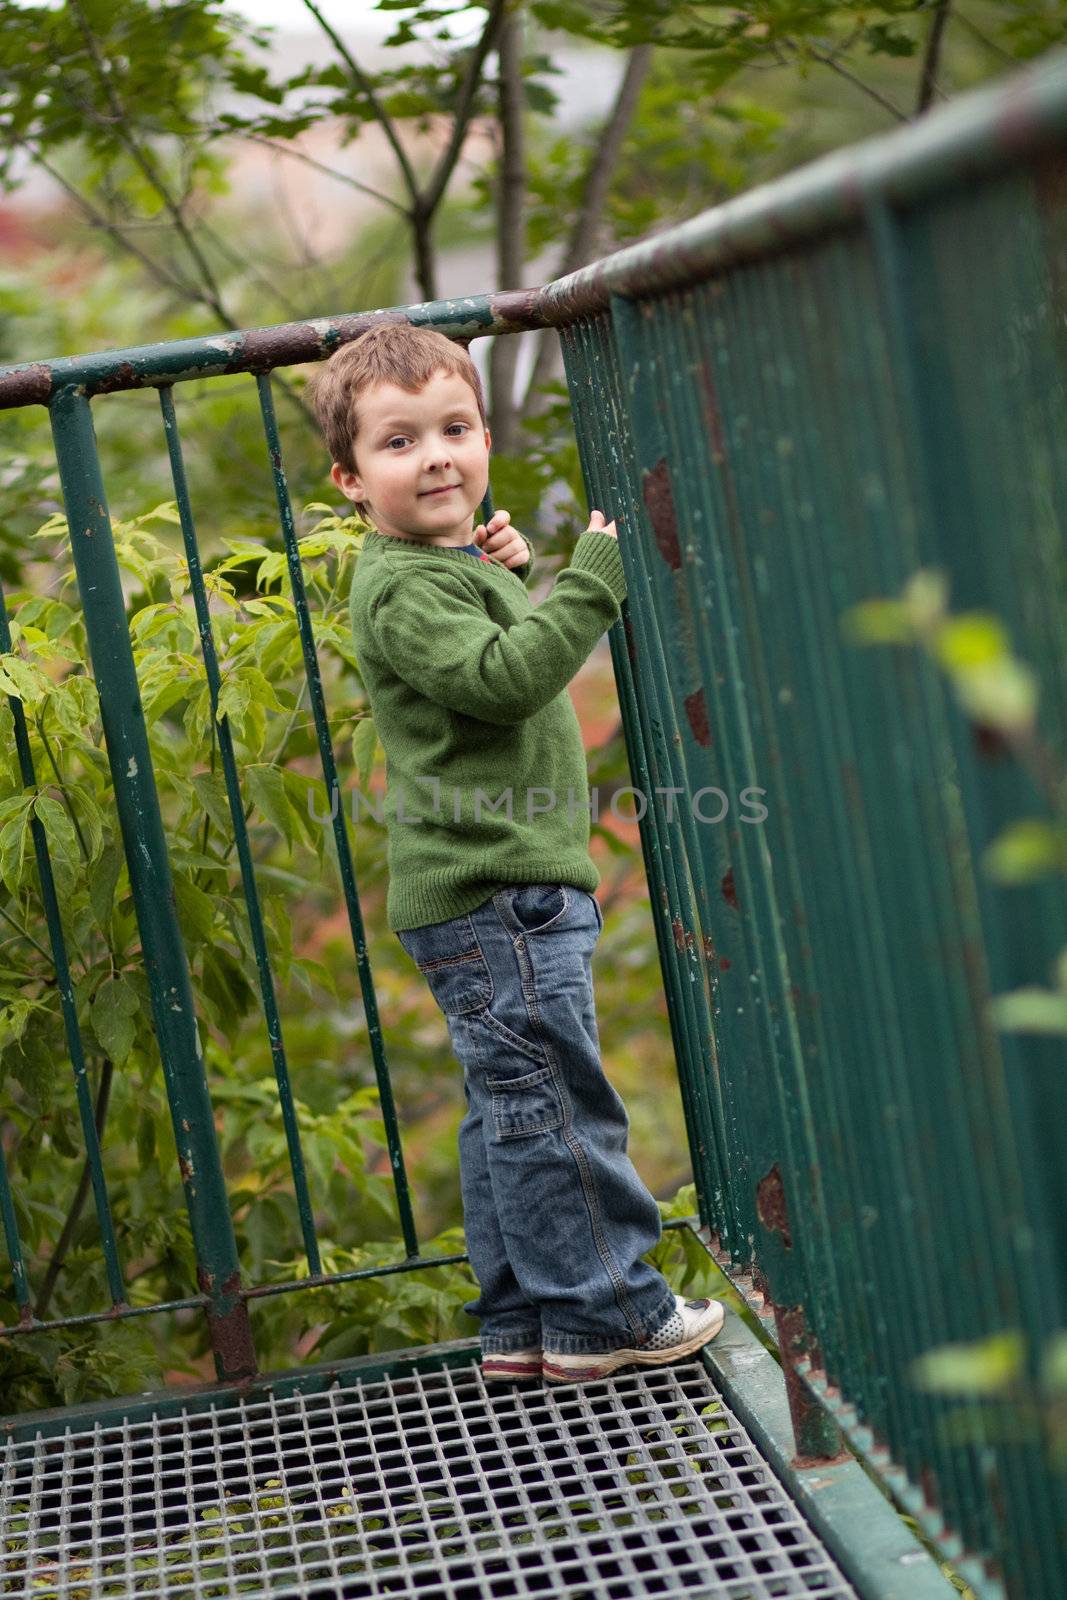 Young boy smiling by a metal fence